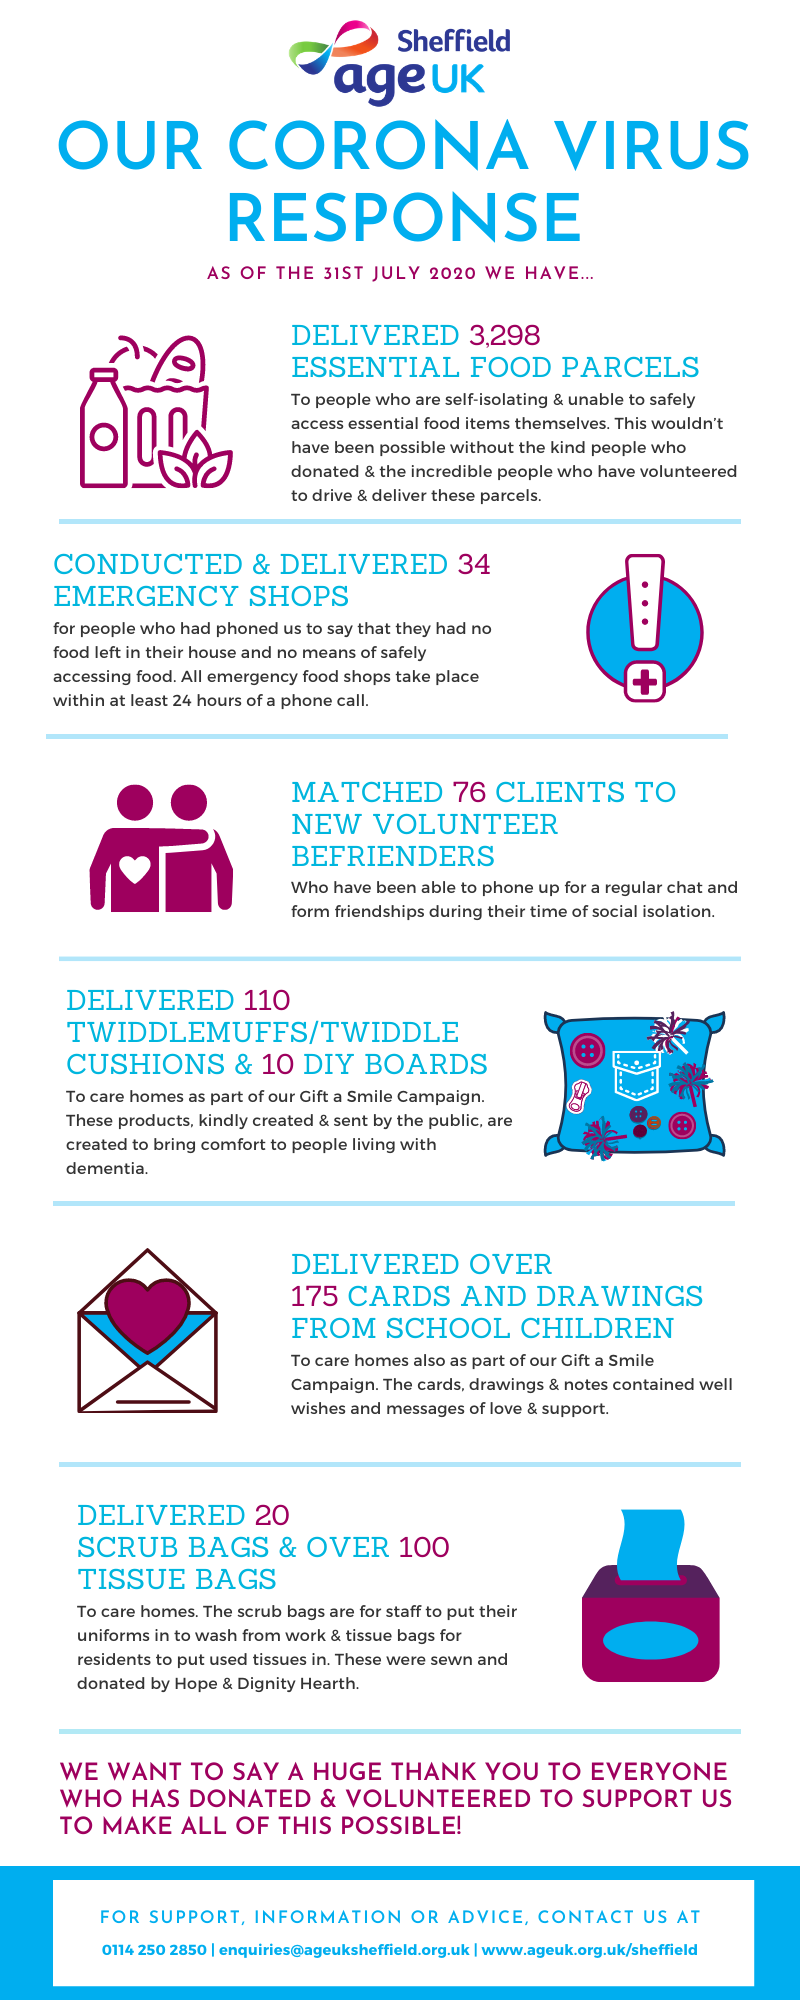 The image shows an info-graphic containing multiple statistics about the different way that Age UK Sheffield helped people across Sheffield during the Covid-19 Pandemic 